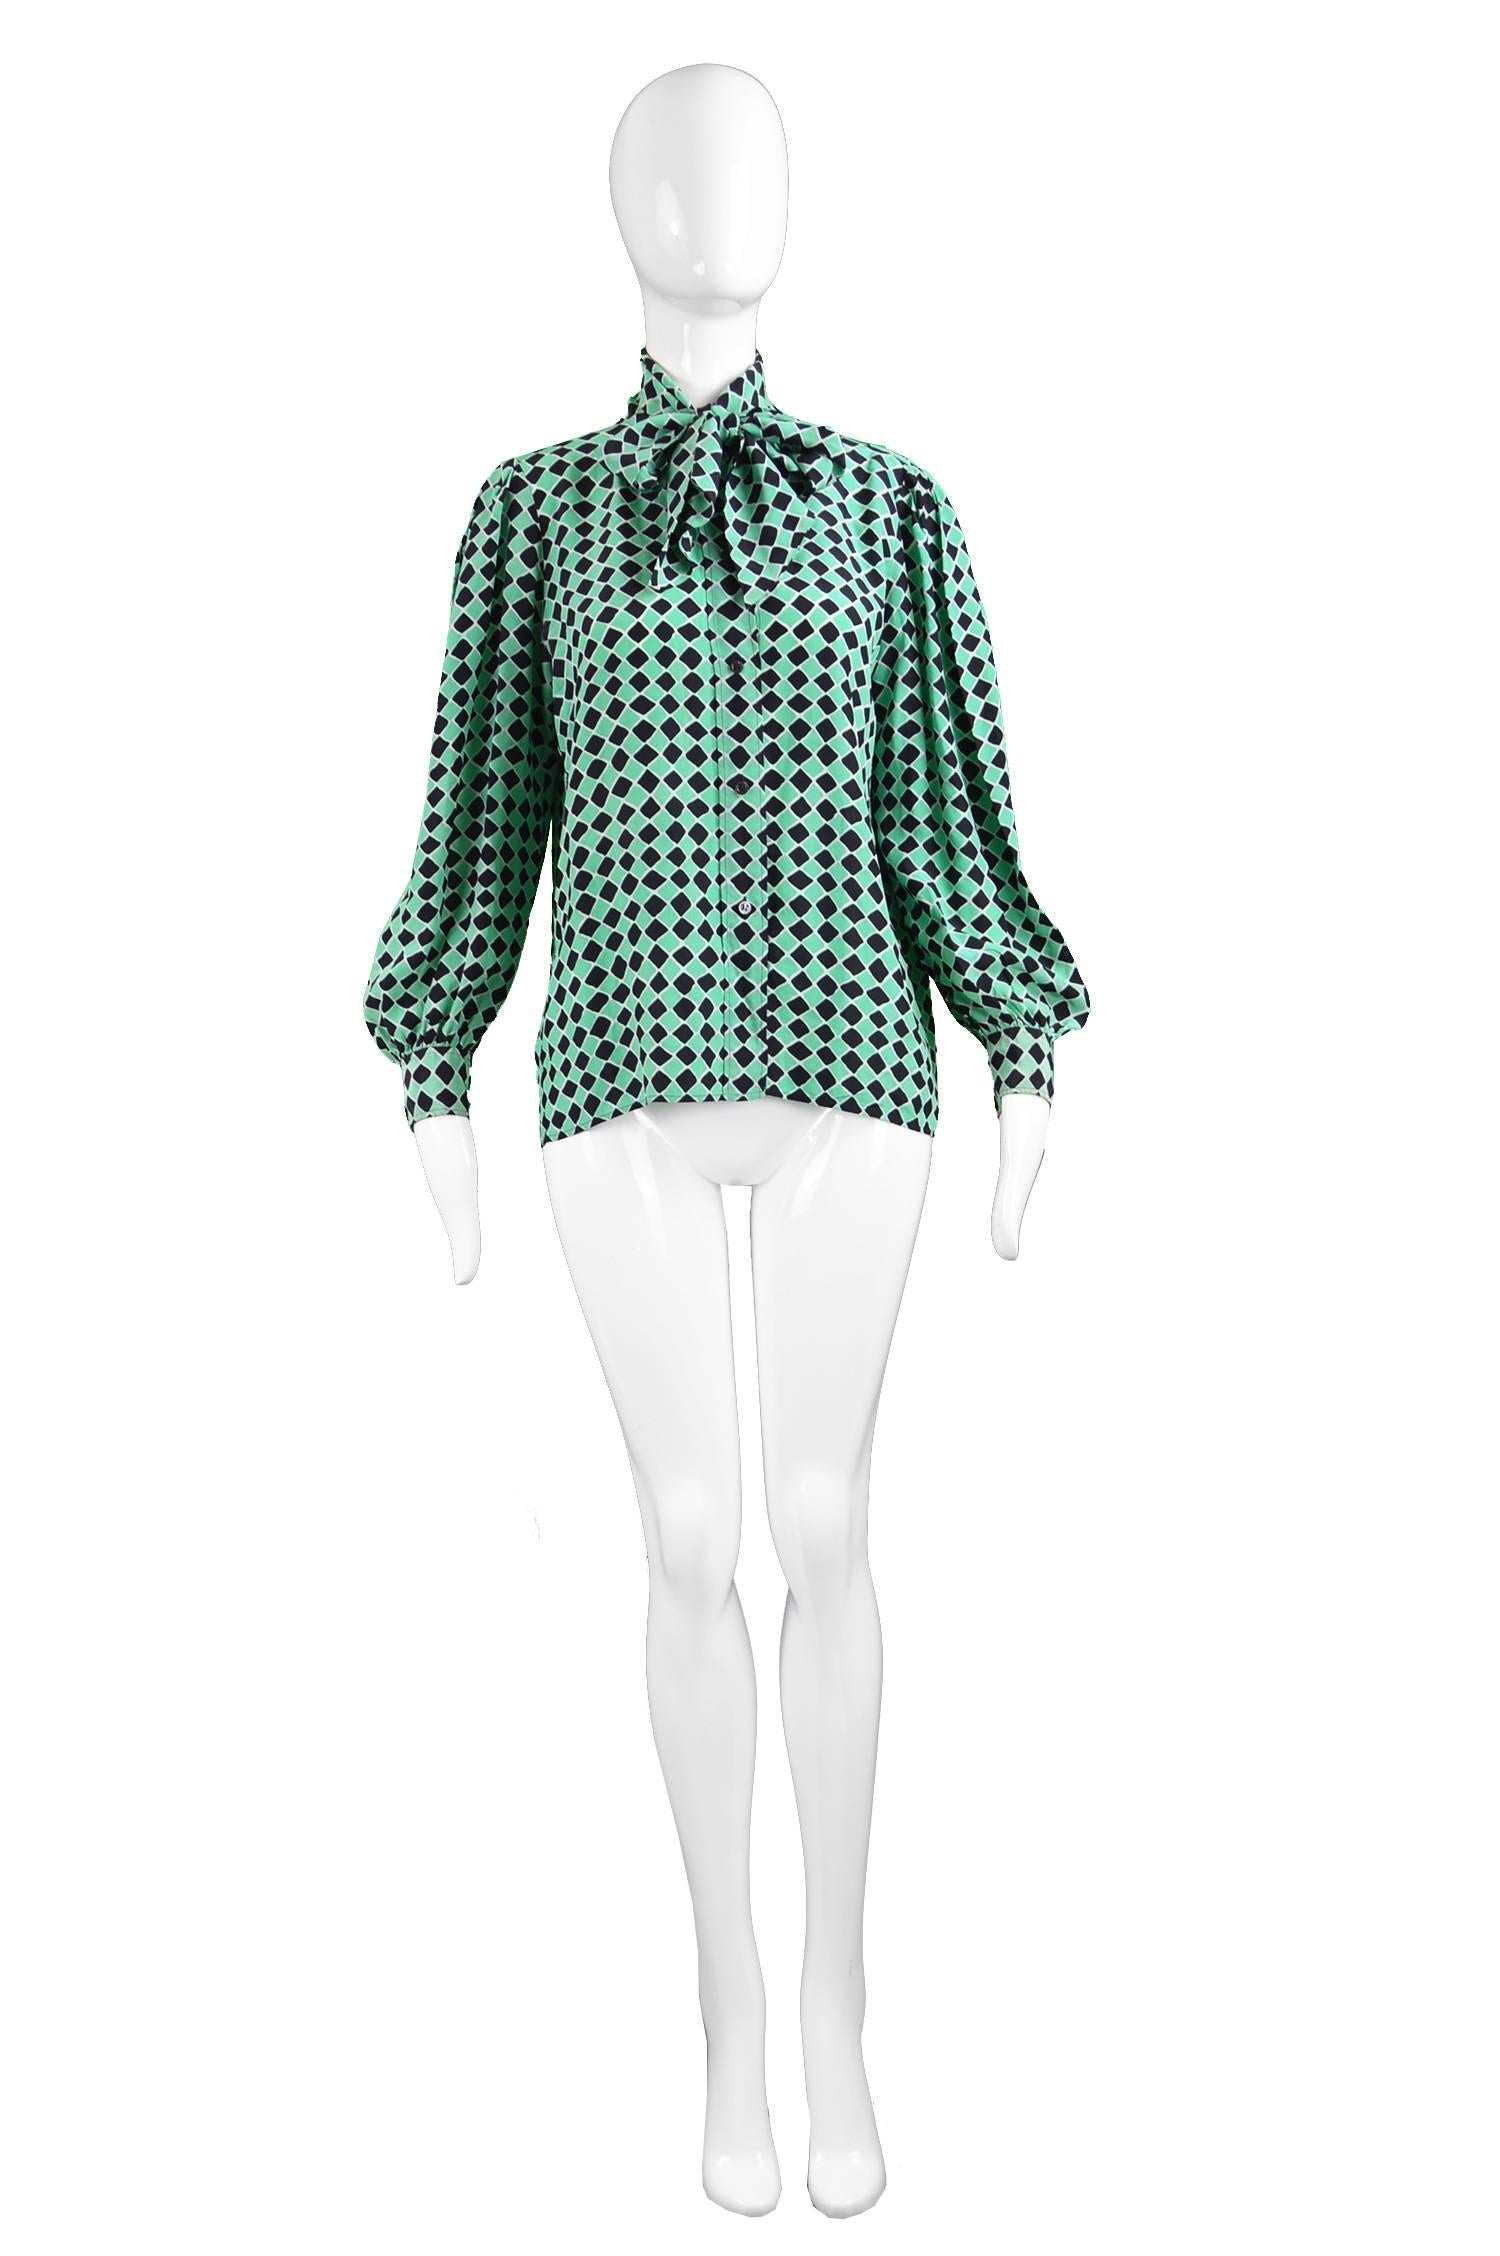 A chic vintage ladies YSL shirt from the 70s by Yves Saint Laurent for his highly collectable rive gauche line. In a green and black diamond printed silk with a pretty pussybow detail at the neck and balloon sleeves. Perfect as an office career